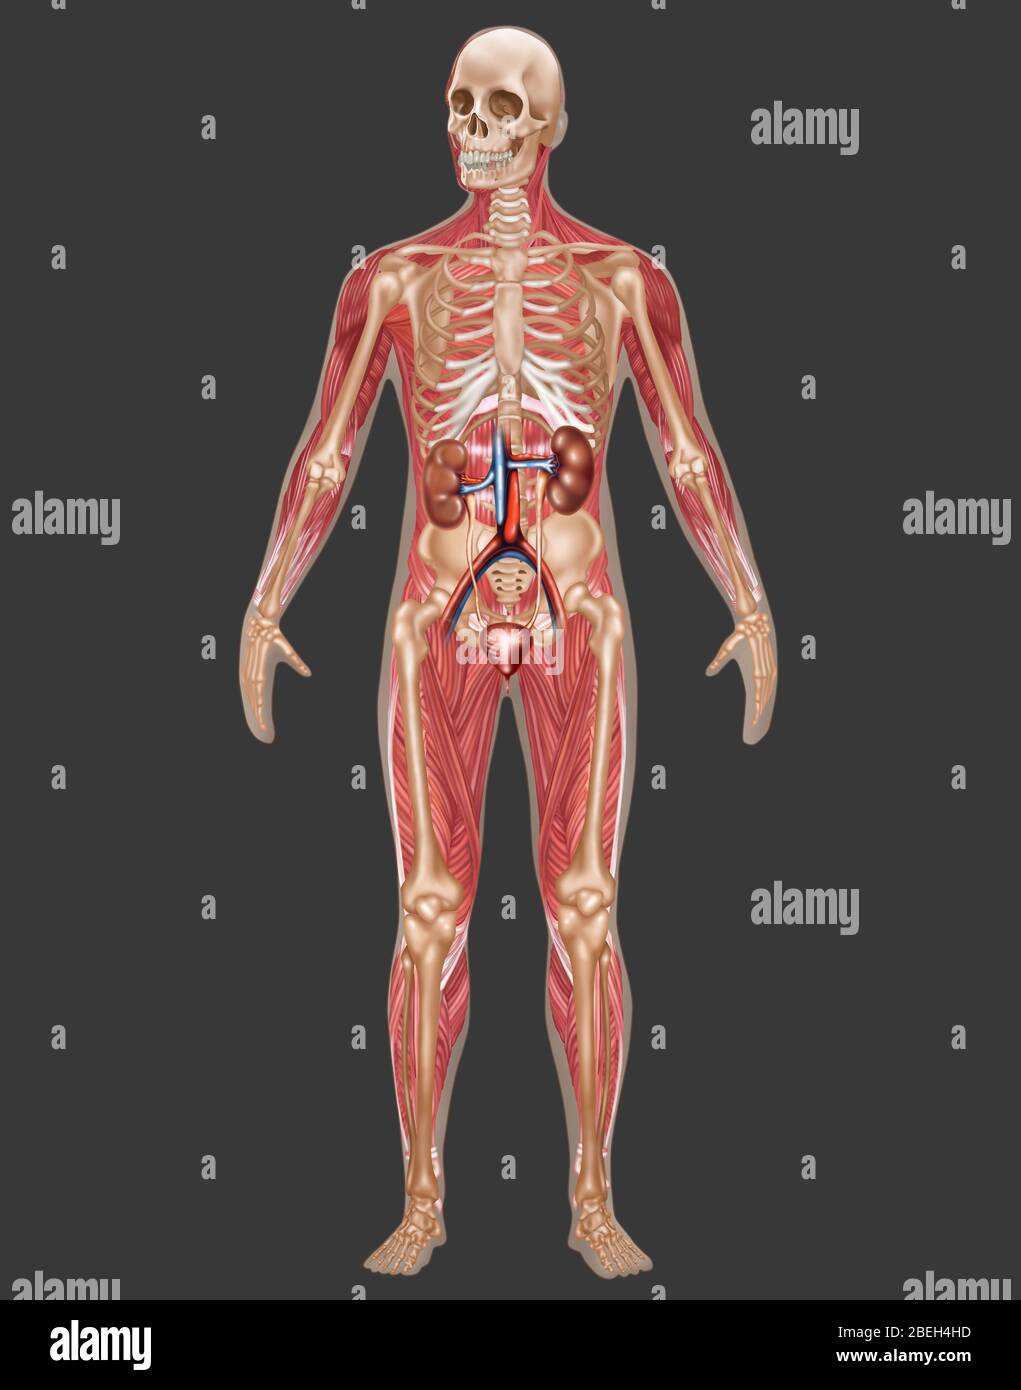 Urinary, Skeletal & Muscular Systems, Male Stock Photo